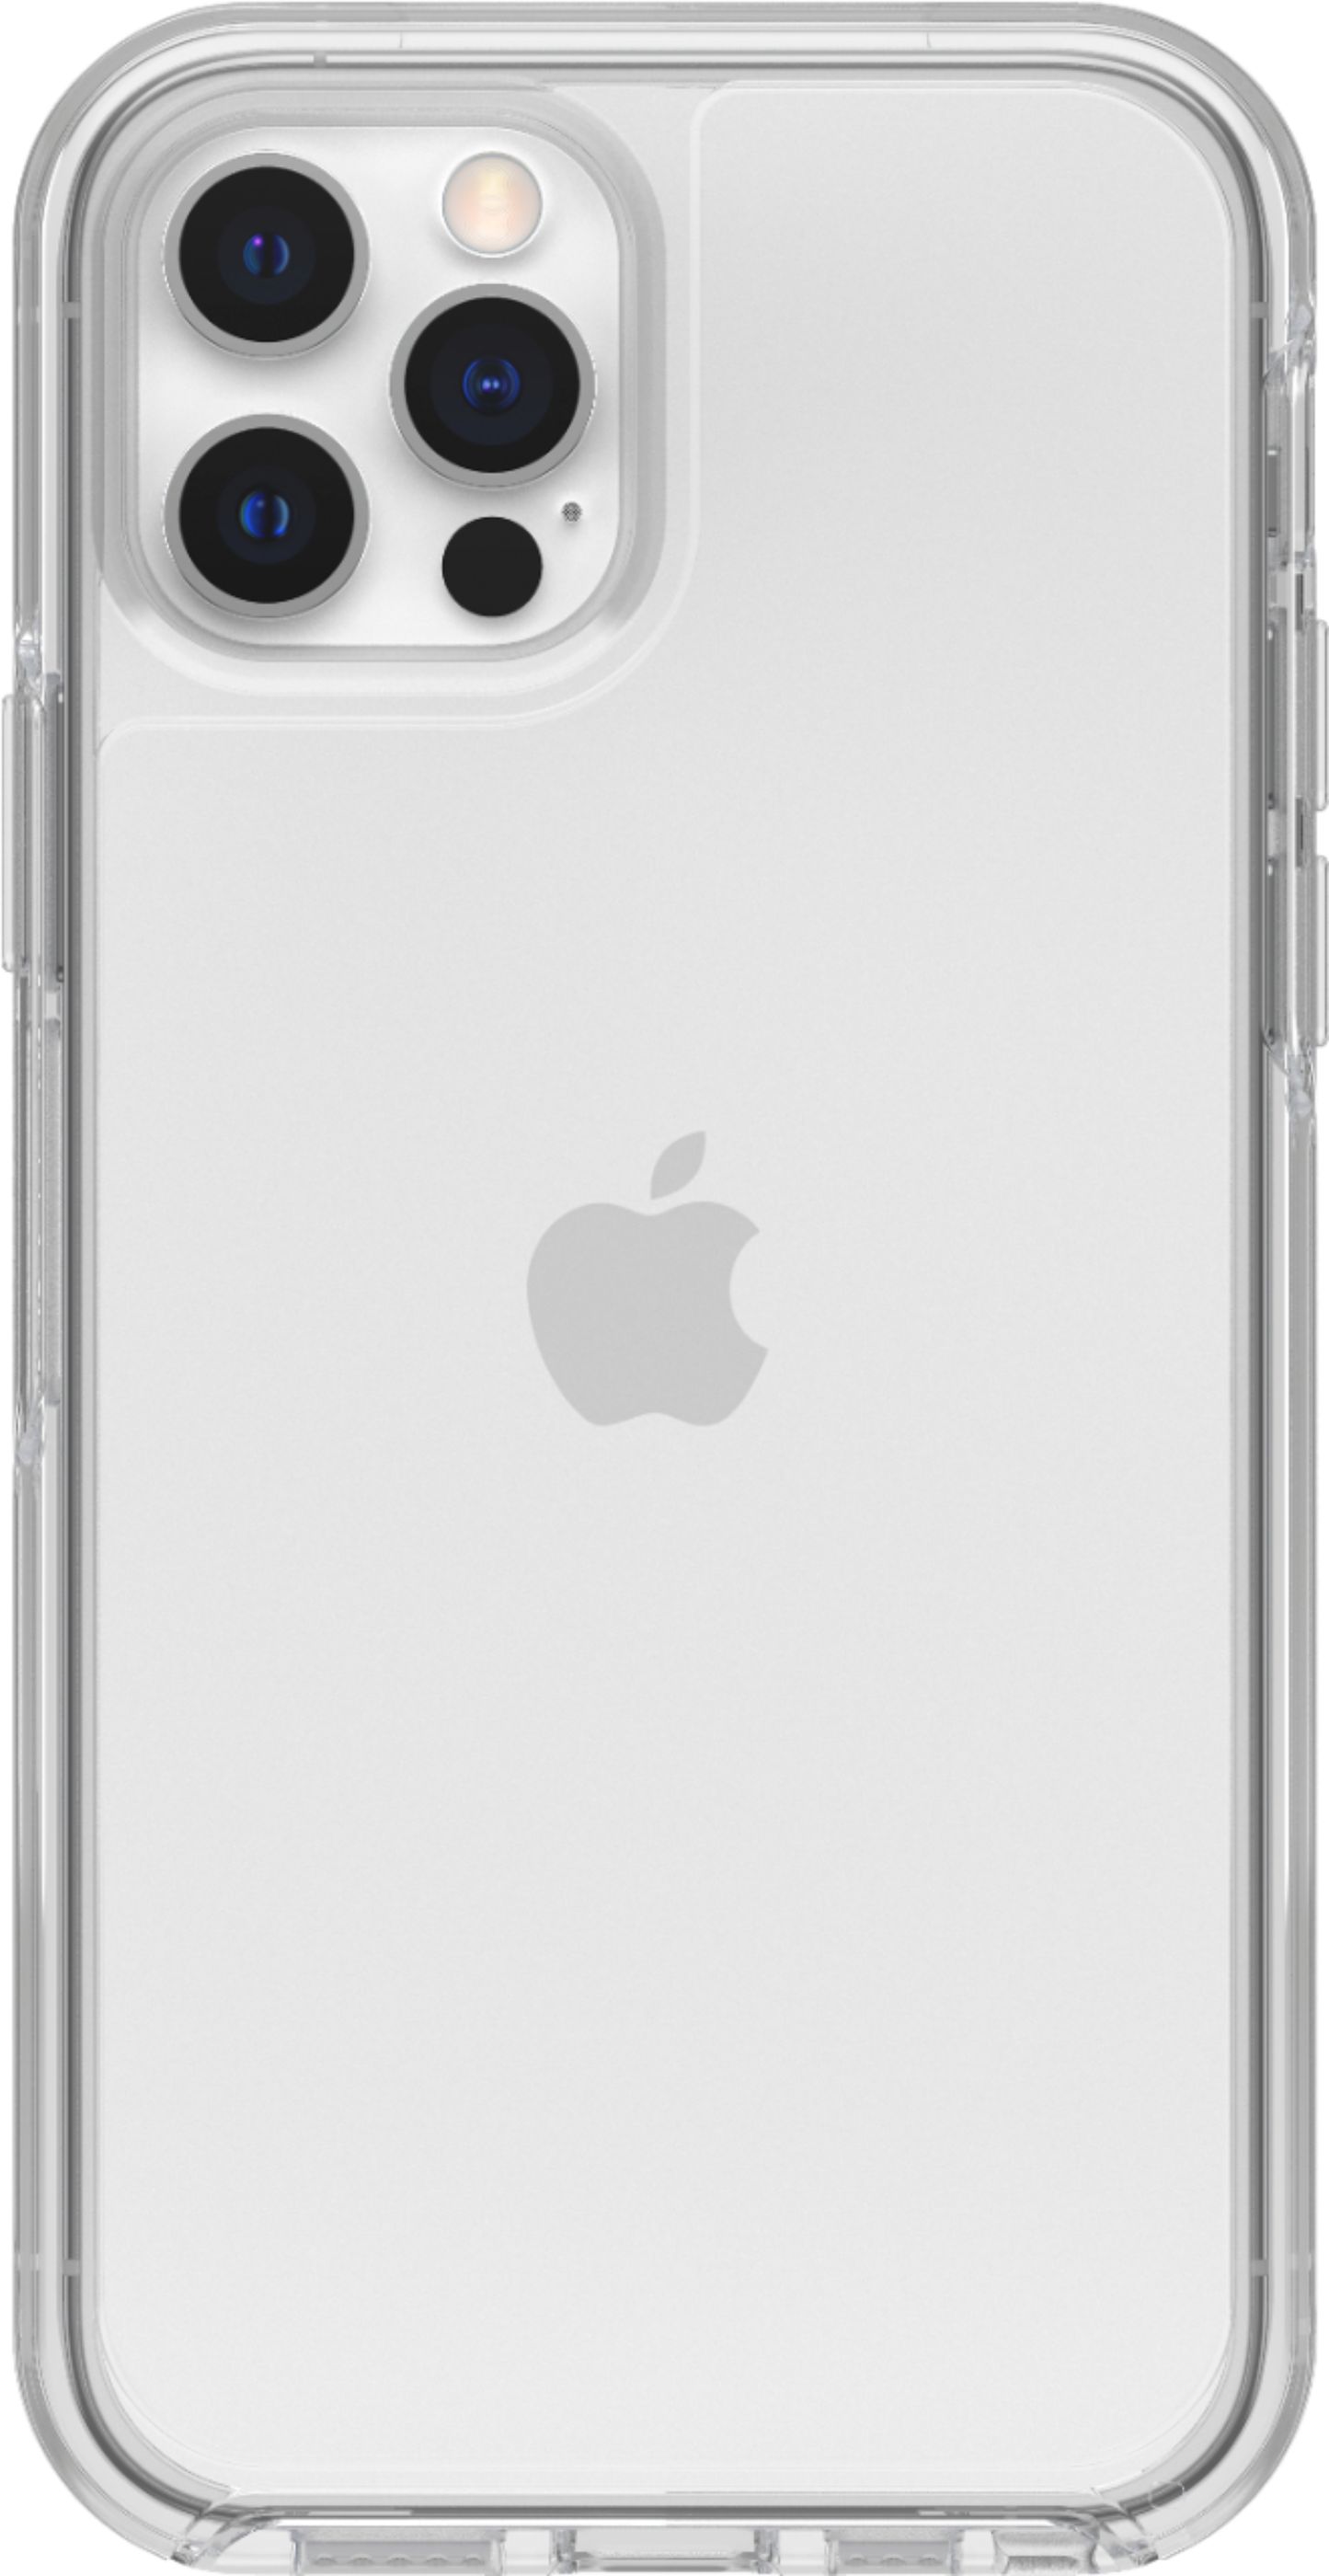 Angle View: Survivor - Endurance Hard shell Case for Apple® iPhone® 12 & iPhone® 12 Pro